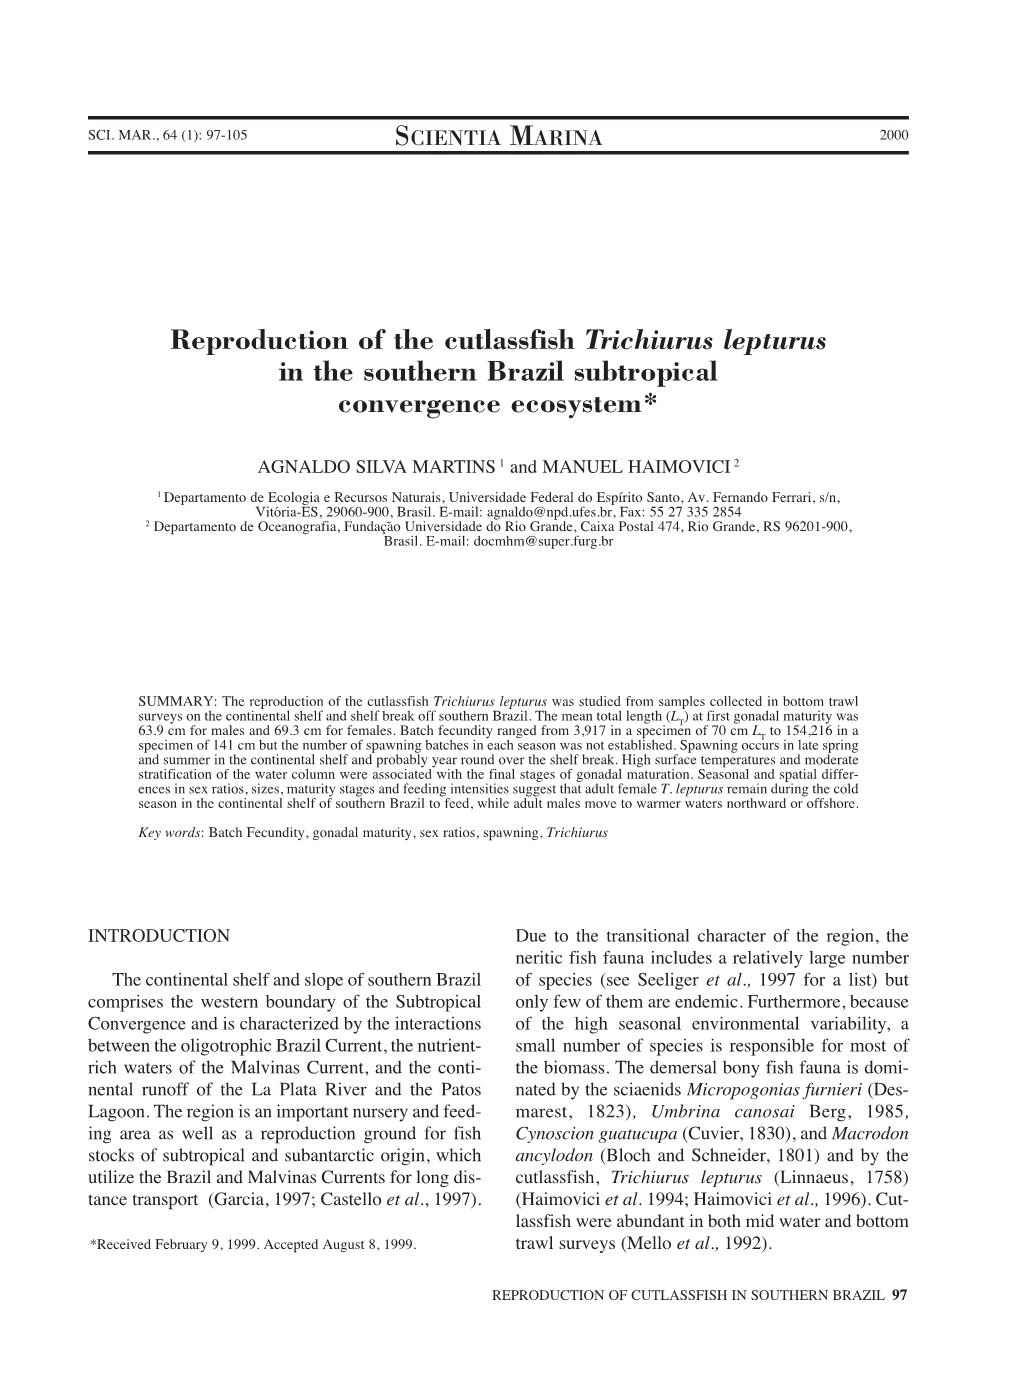 Reproduction of the Cutlassfish Trichiurus Lepturus in the Southern Brazil Subtropical Convergence Ecosystem*